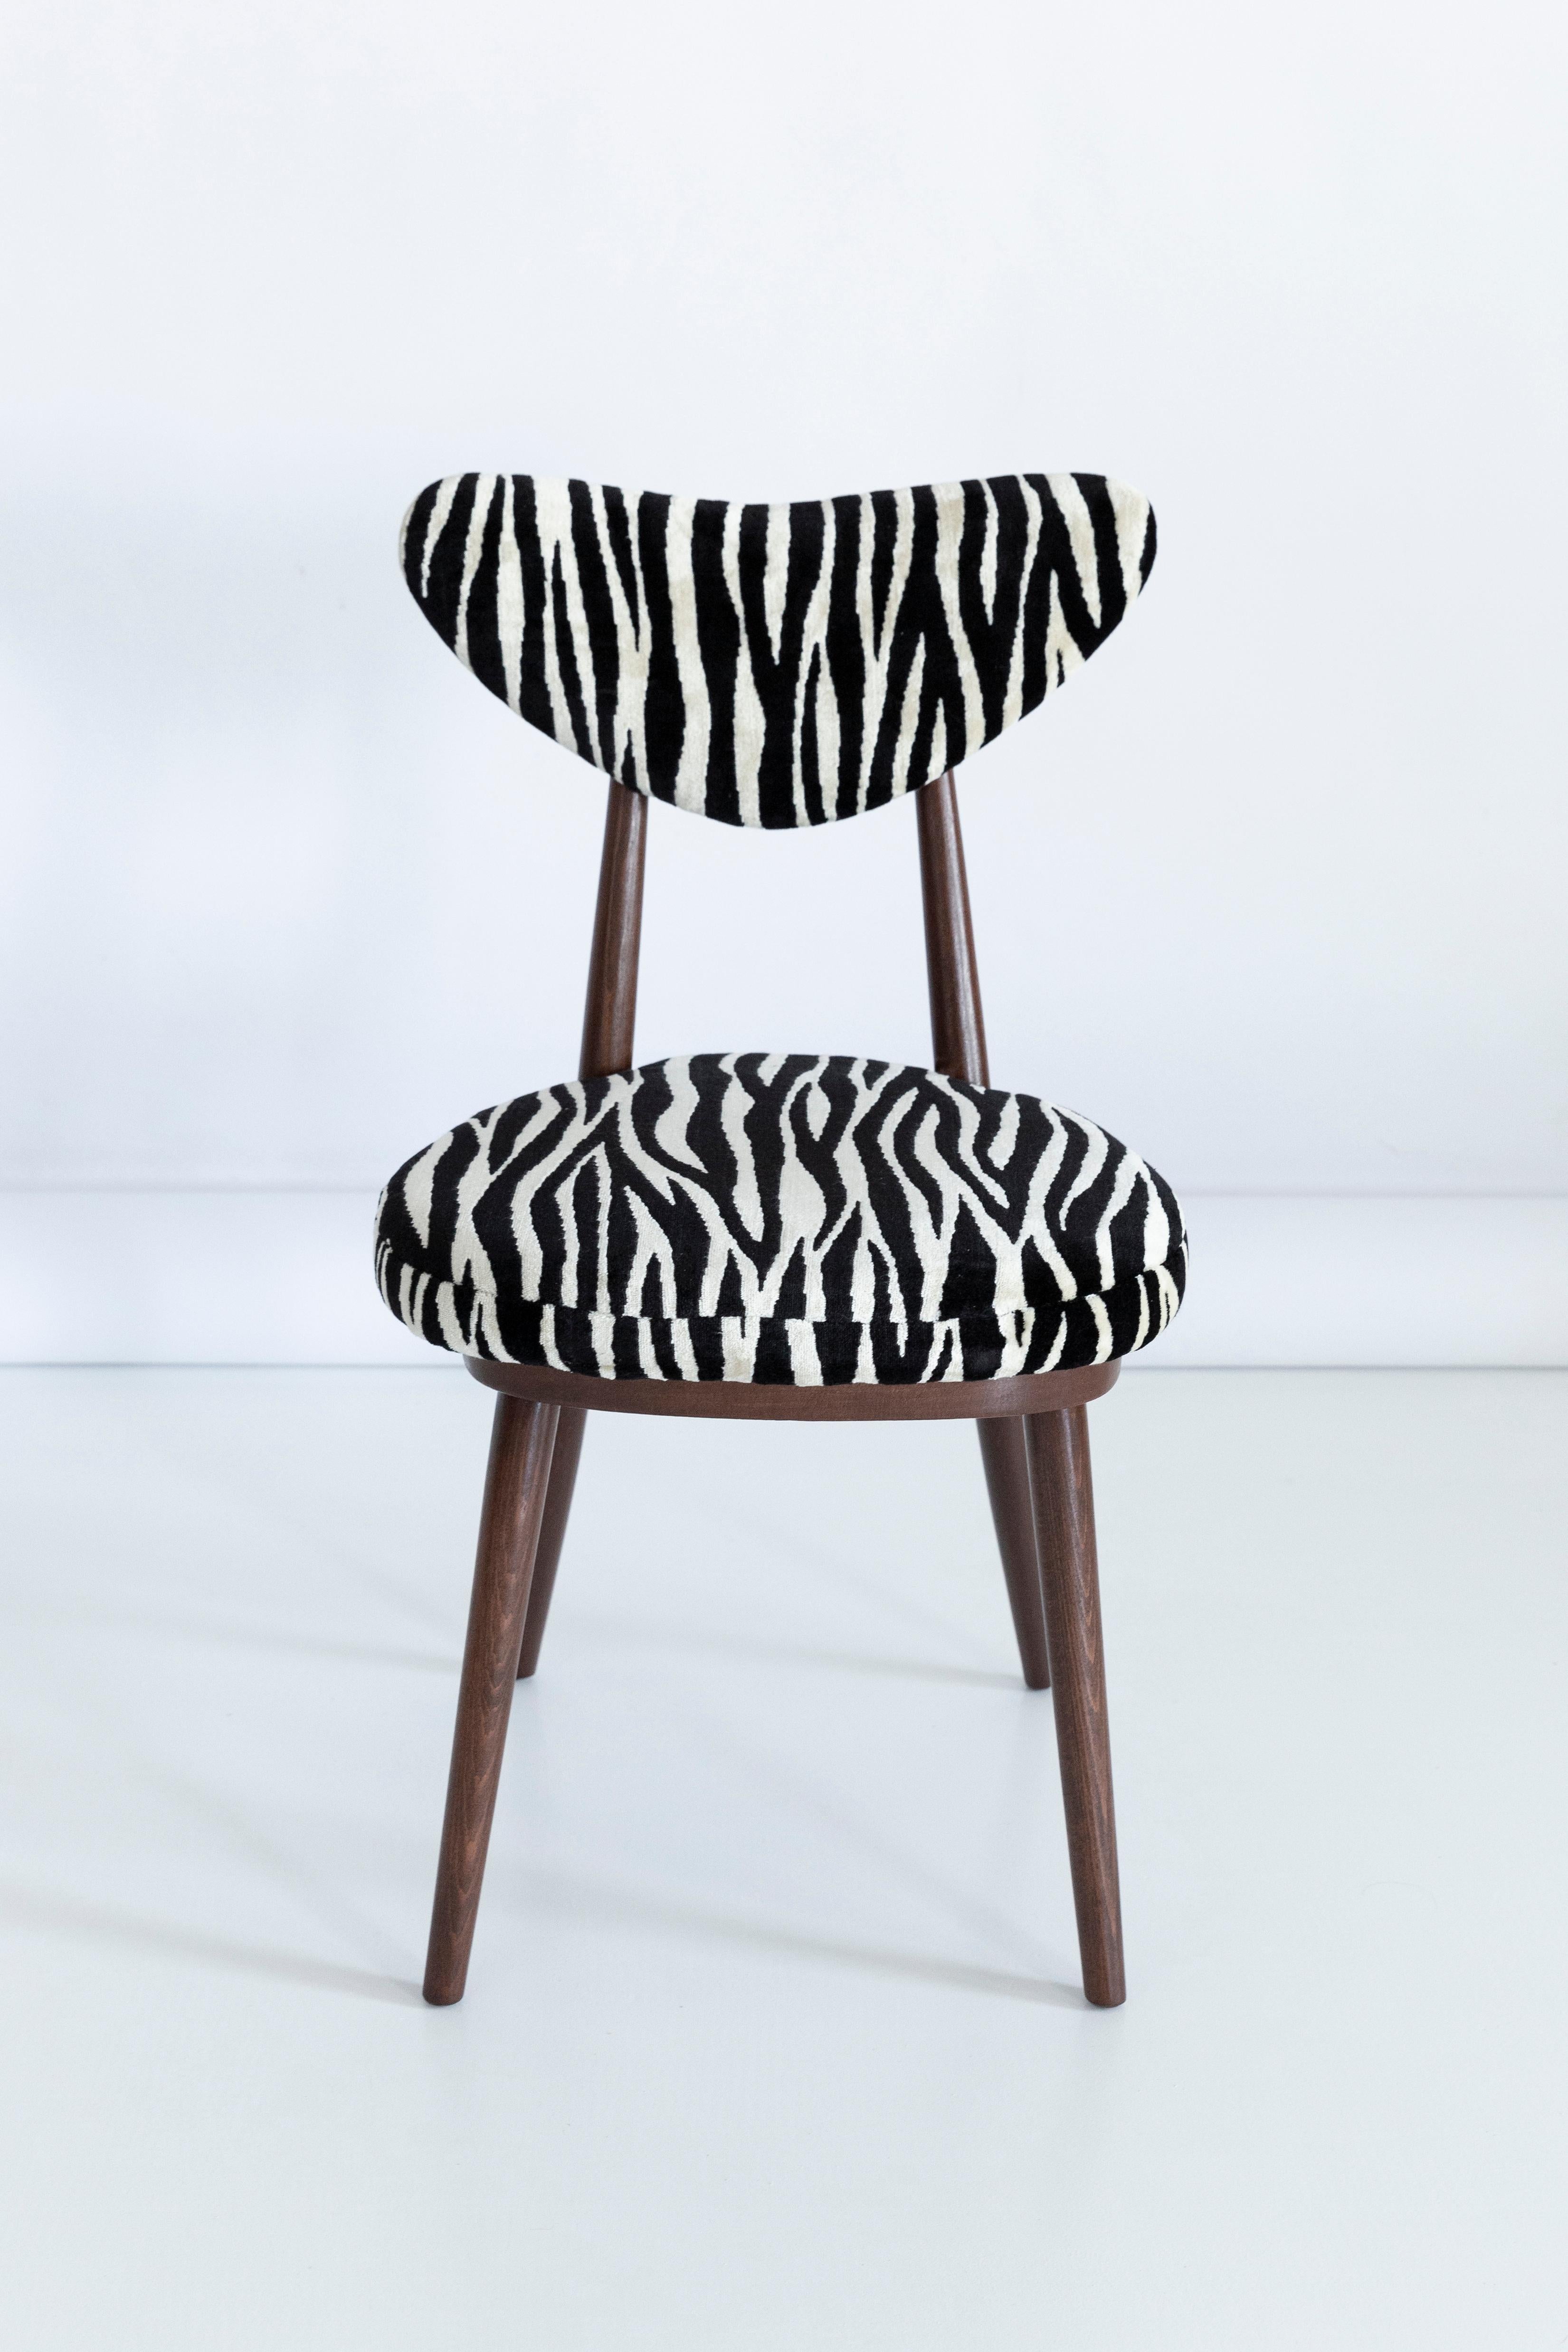 Set of Four Midcentury Zebra Black and White Heart Chairs, Poland, 1960s For Sale 6